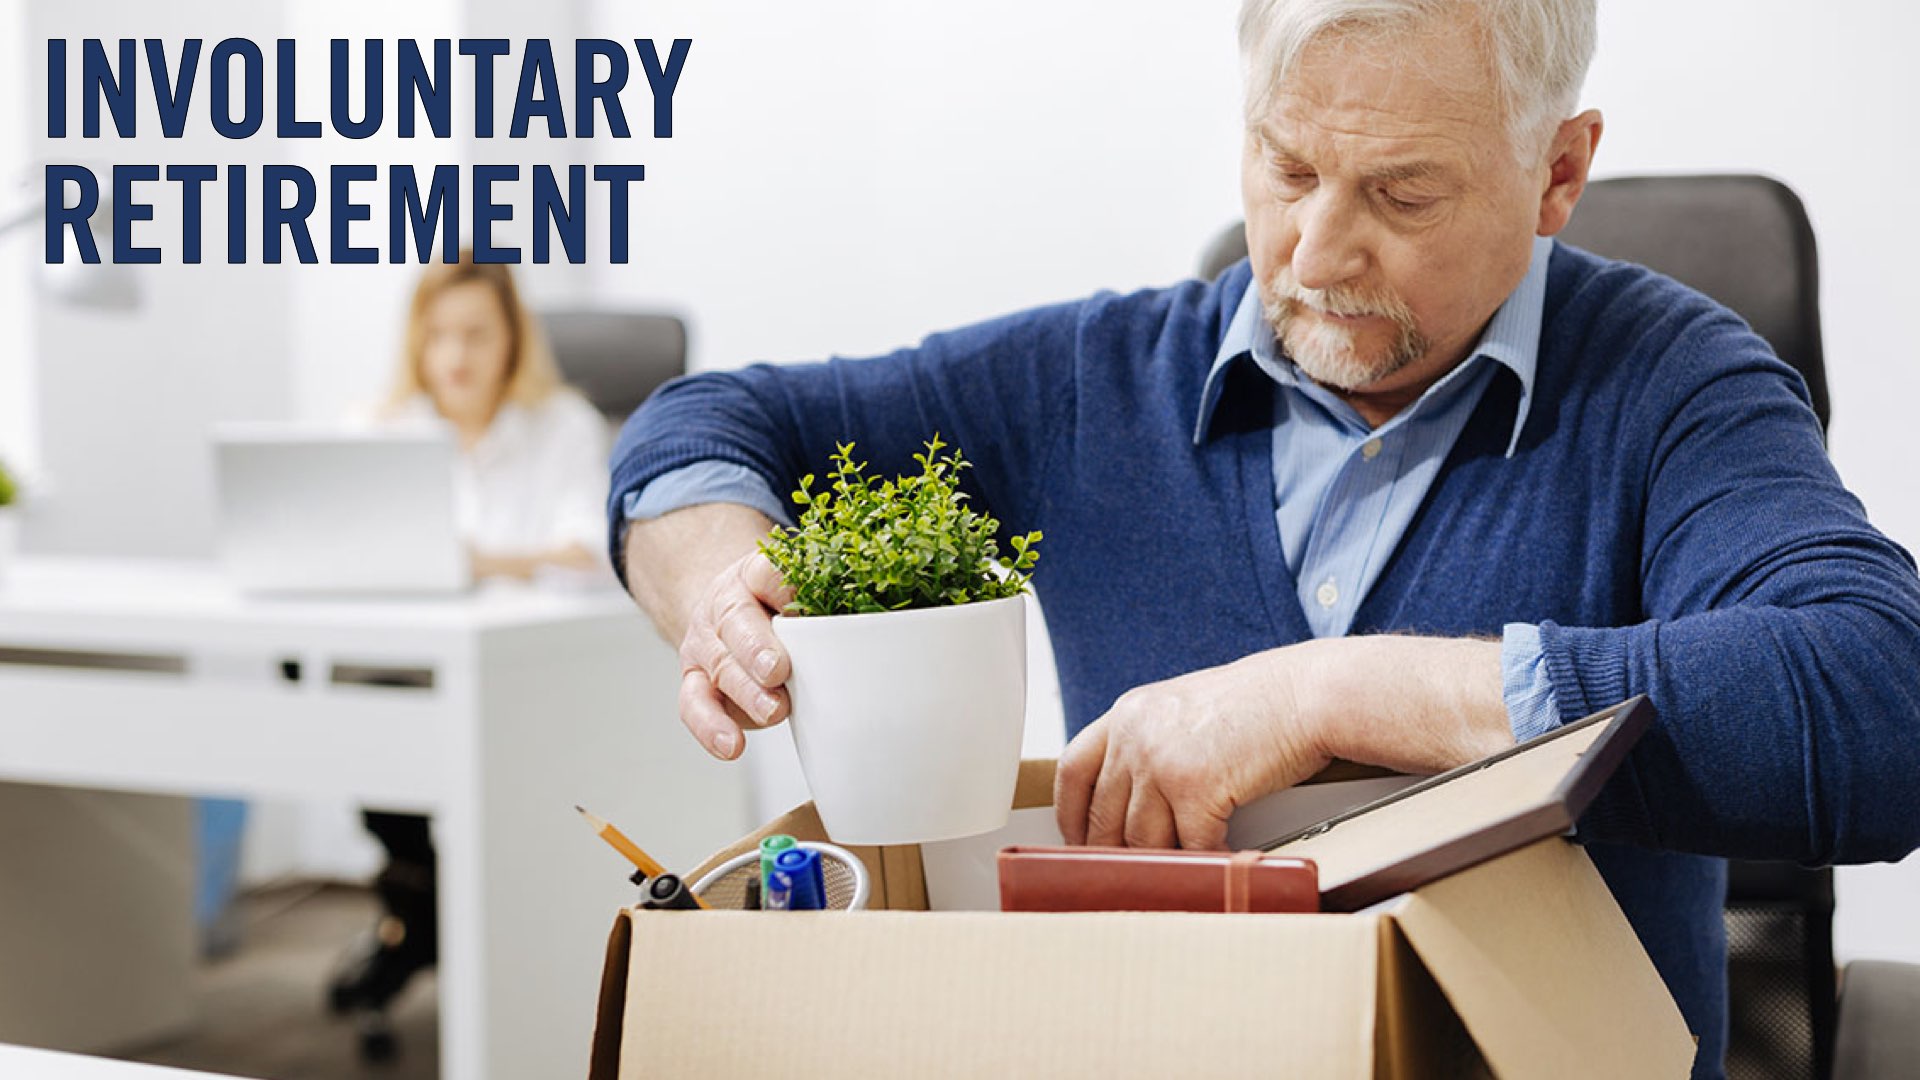 many older Americans have been laid off facing an 'involuntary retirement'